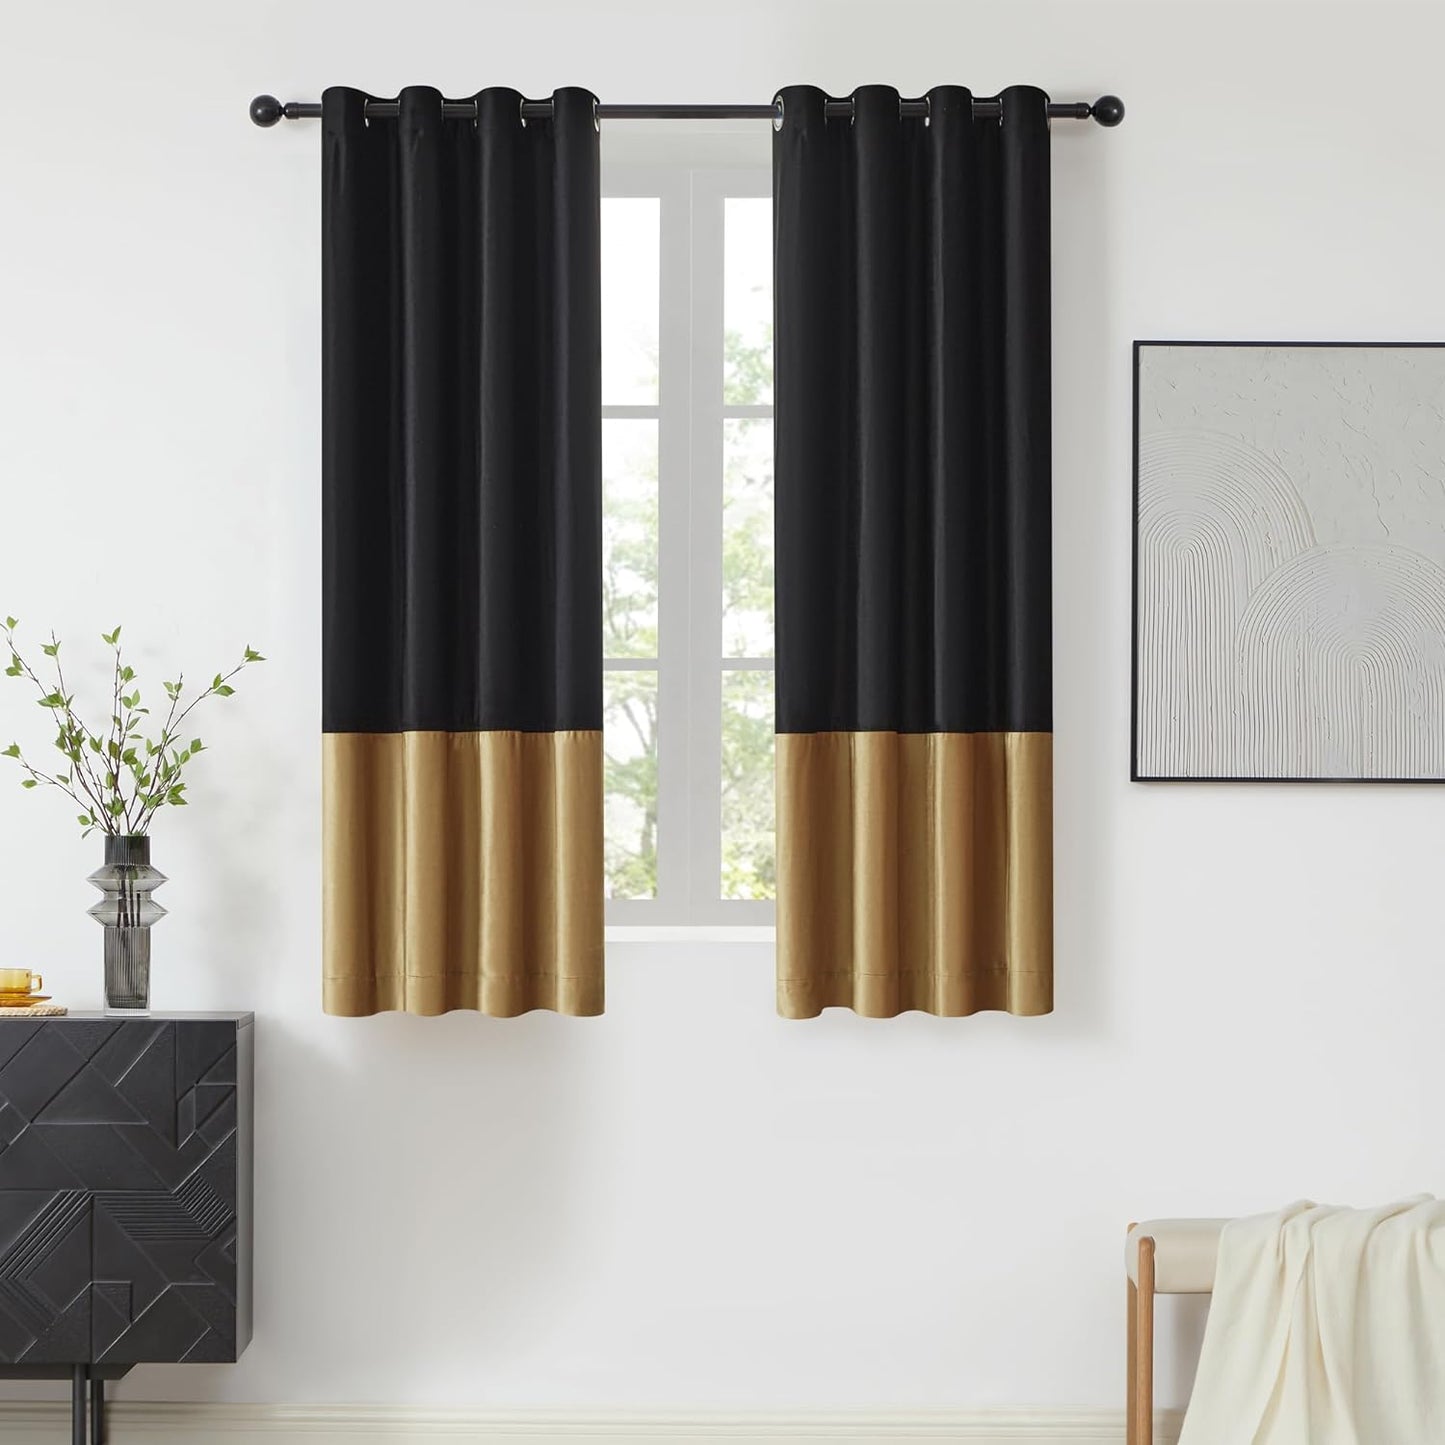 BULBUL Color Block Window Curtains Panels 84 Inches Long Cream Ivory Gold Velvet Farmhouse Drapes for Bedroom Living Room Darkening Treatment with Grommet Set of 2  BULBUL Black  Gold 52"W X 63"L 